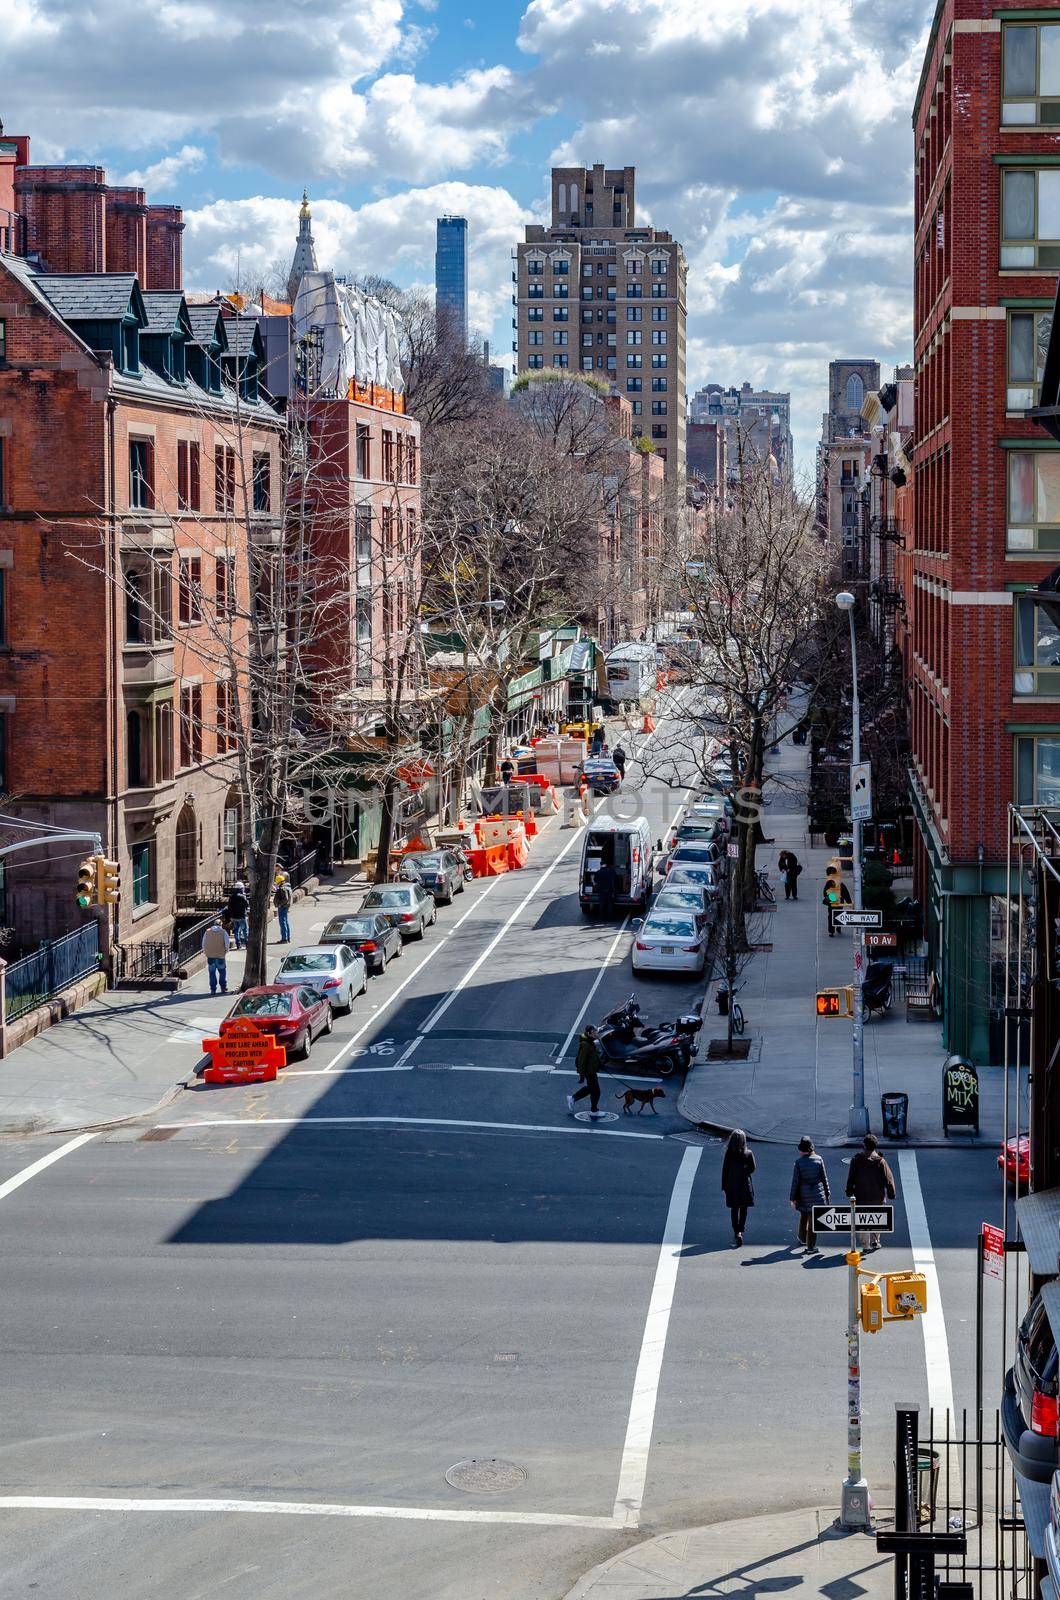 Chelsea crossroads City Street, aerial view from the High Line Rooftop Park, New York City by bildgigant